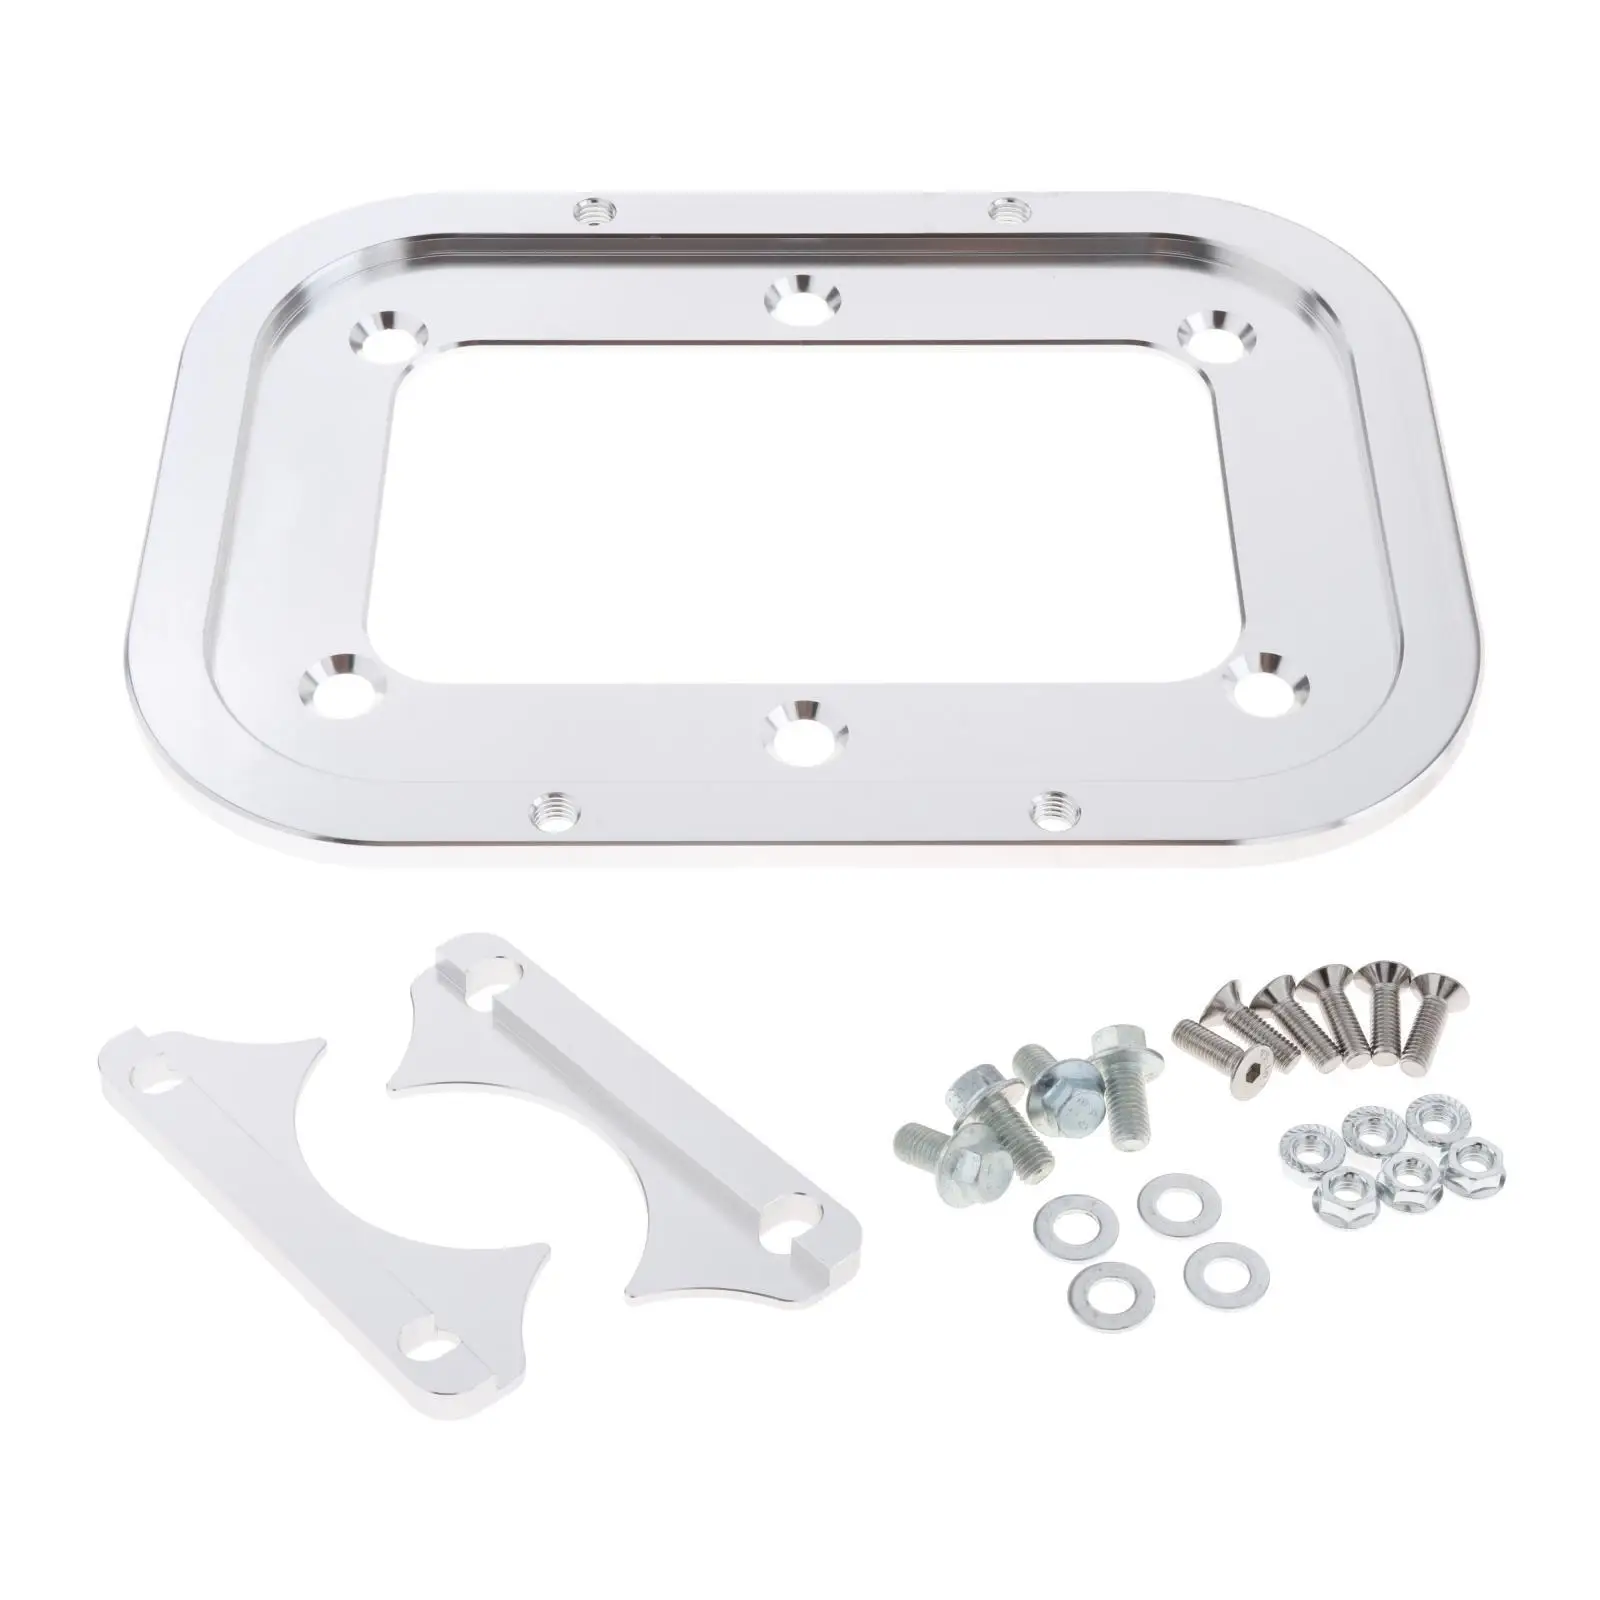 Billet Aluminum Battery Relocation Tray for  34/7 4M D34 34 D34 78 High Performance Vehicle